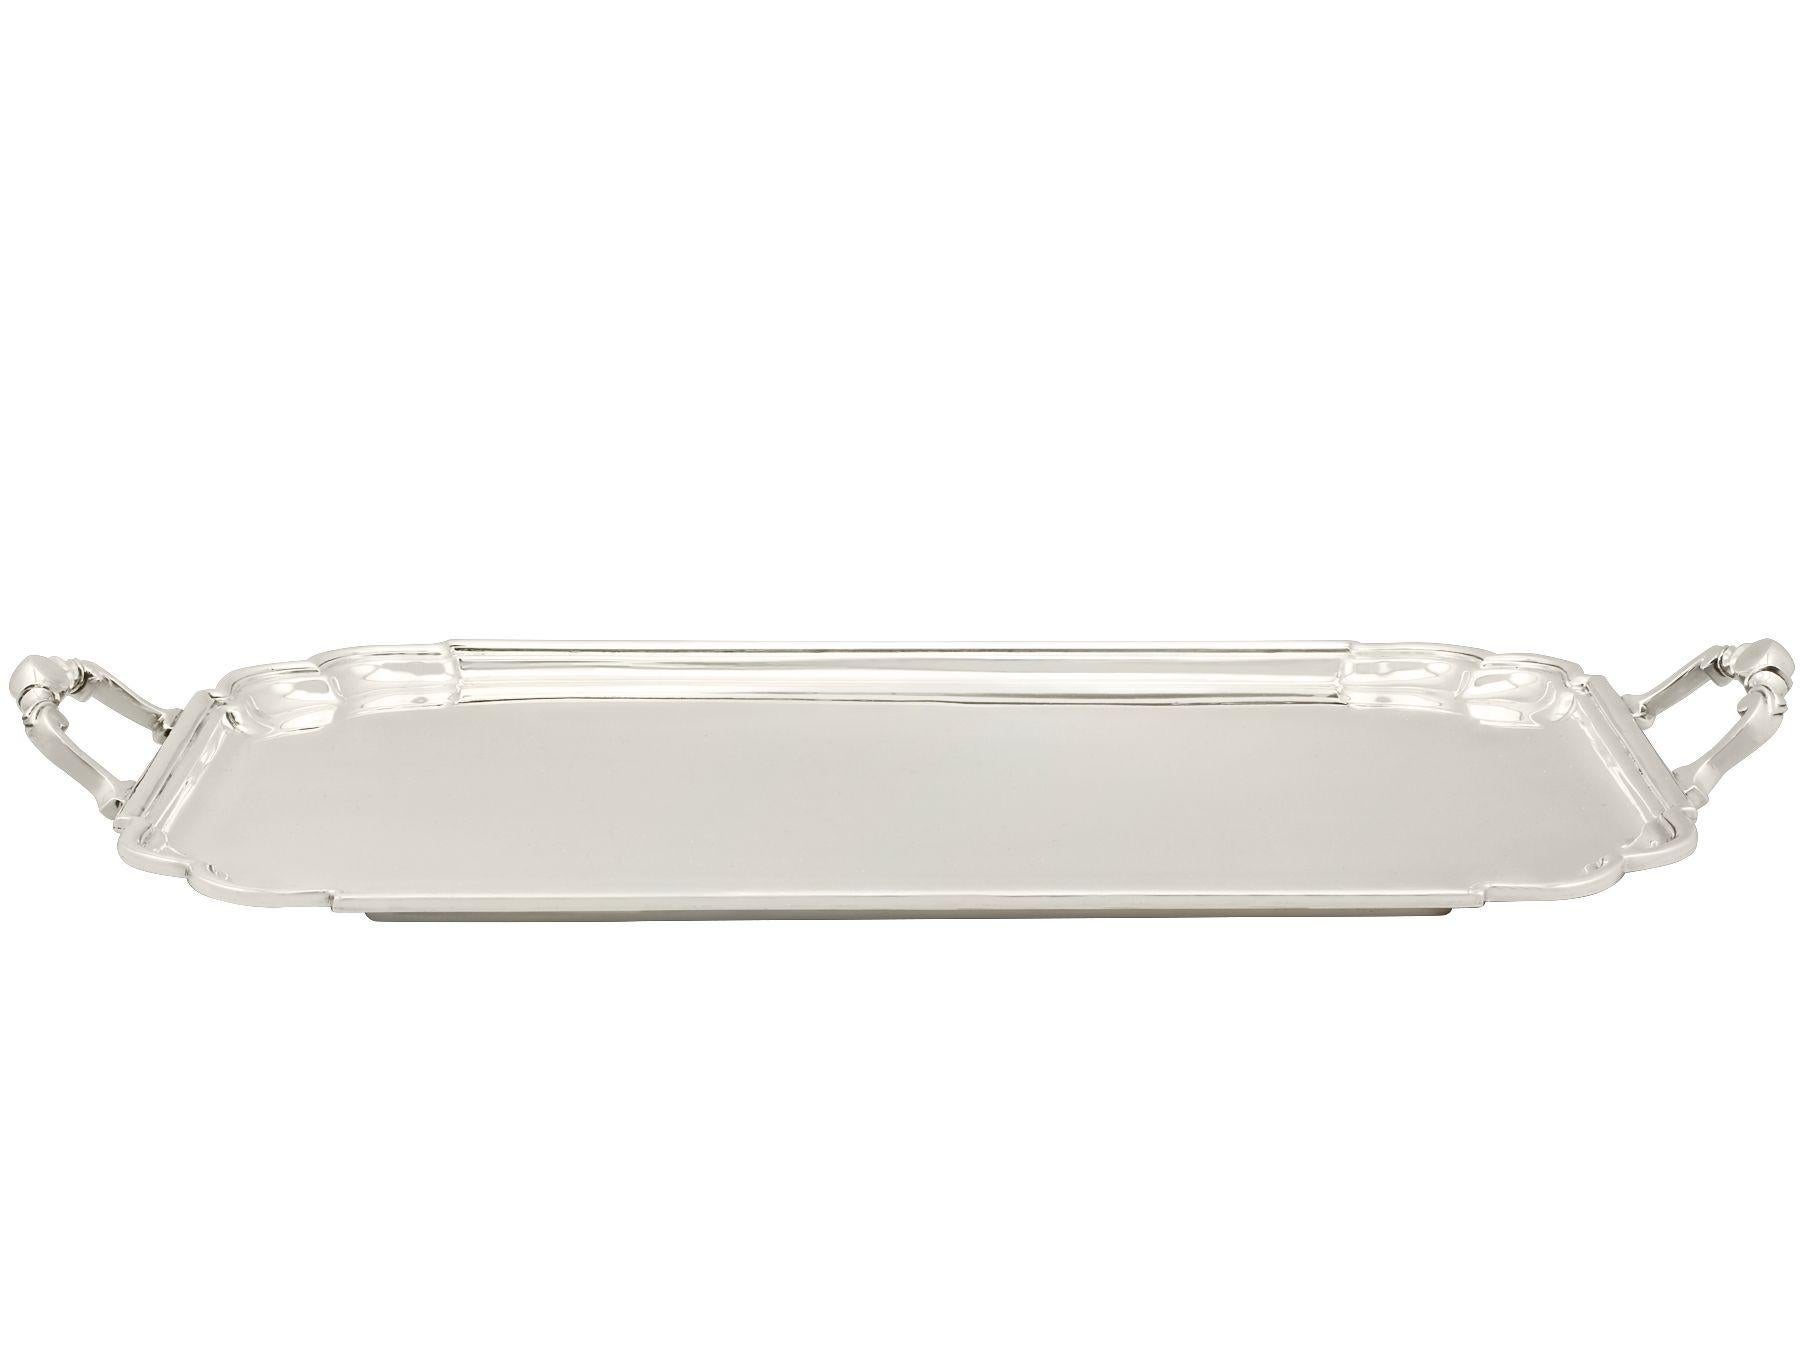 An exceptional, fine and impressive vintage George VI English sterling silver Art Deco style two handled tea tray; an addition to our silver tray collection.

This exceptional vintage sterling silver tray has a rectangular rounded form with